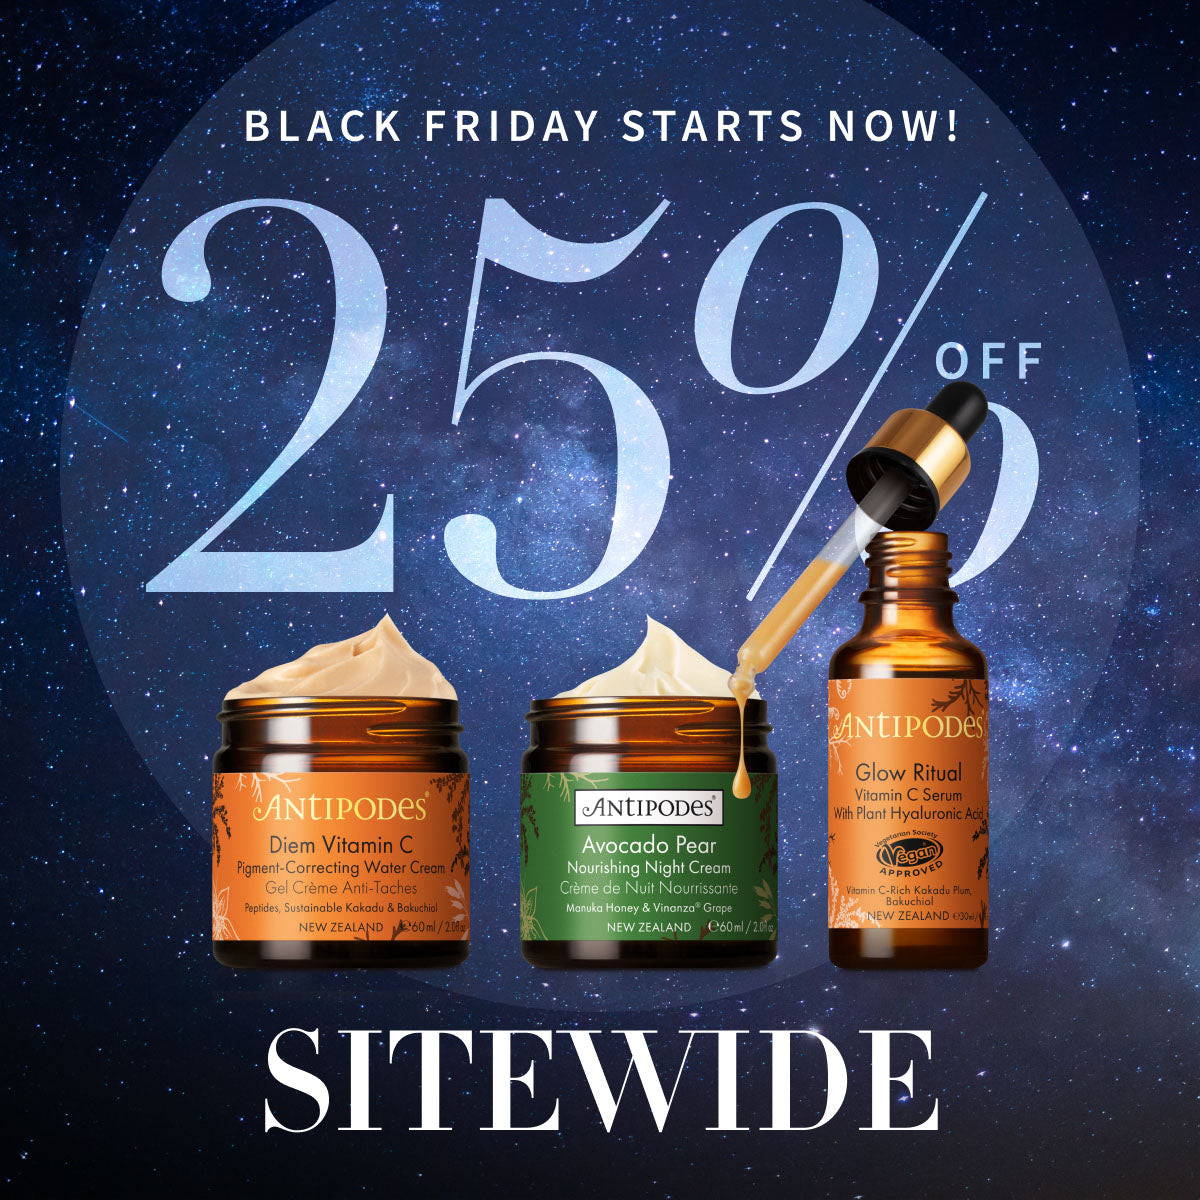 Black Friday starts now 25% off sitewide